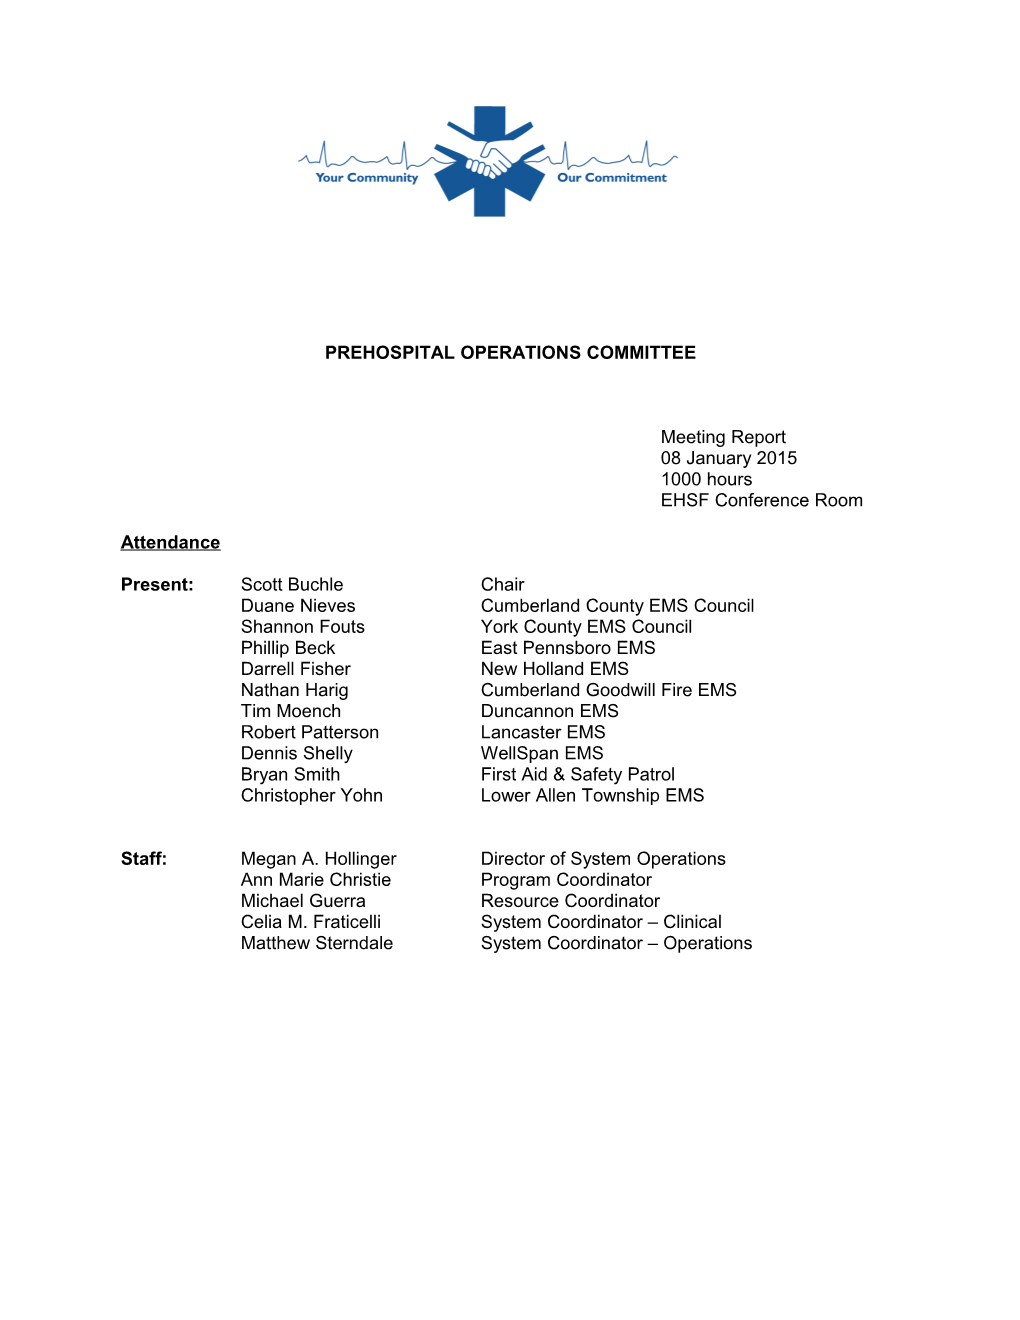 Prehospital Operations Committee